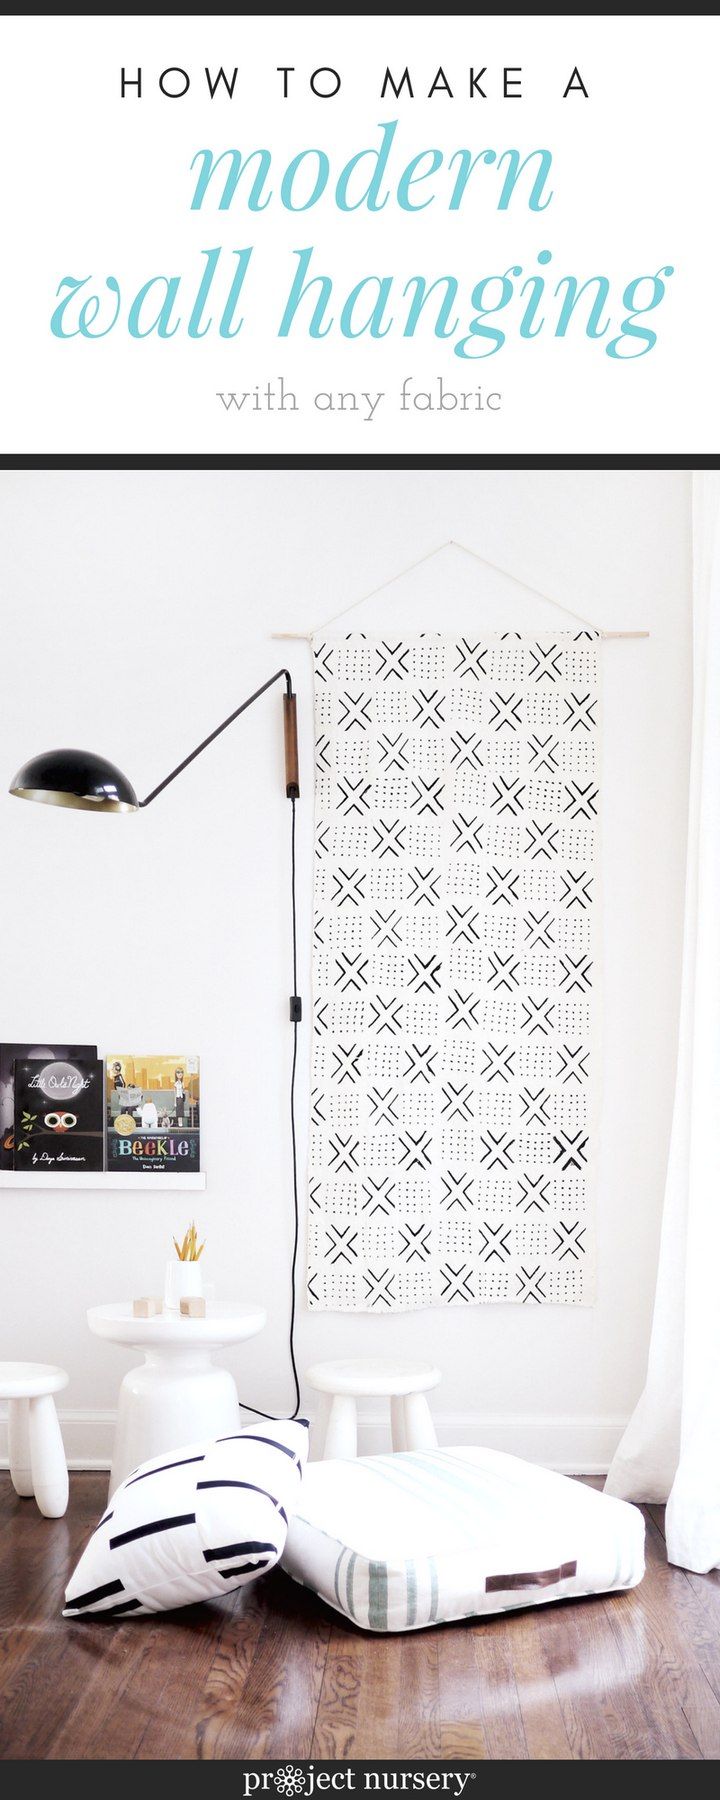 Turn Any Fabric into a Modern Wall Hanging